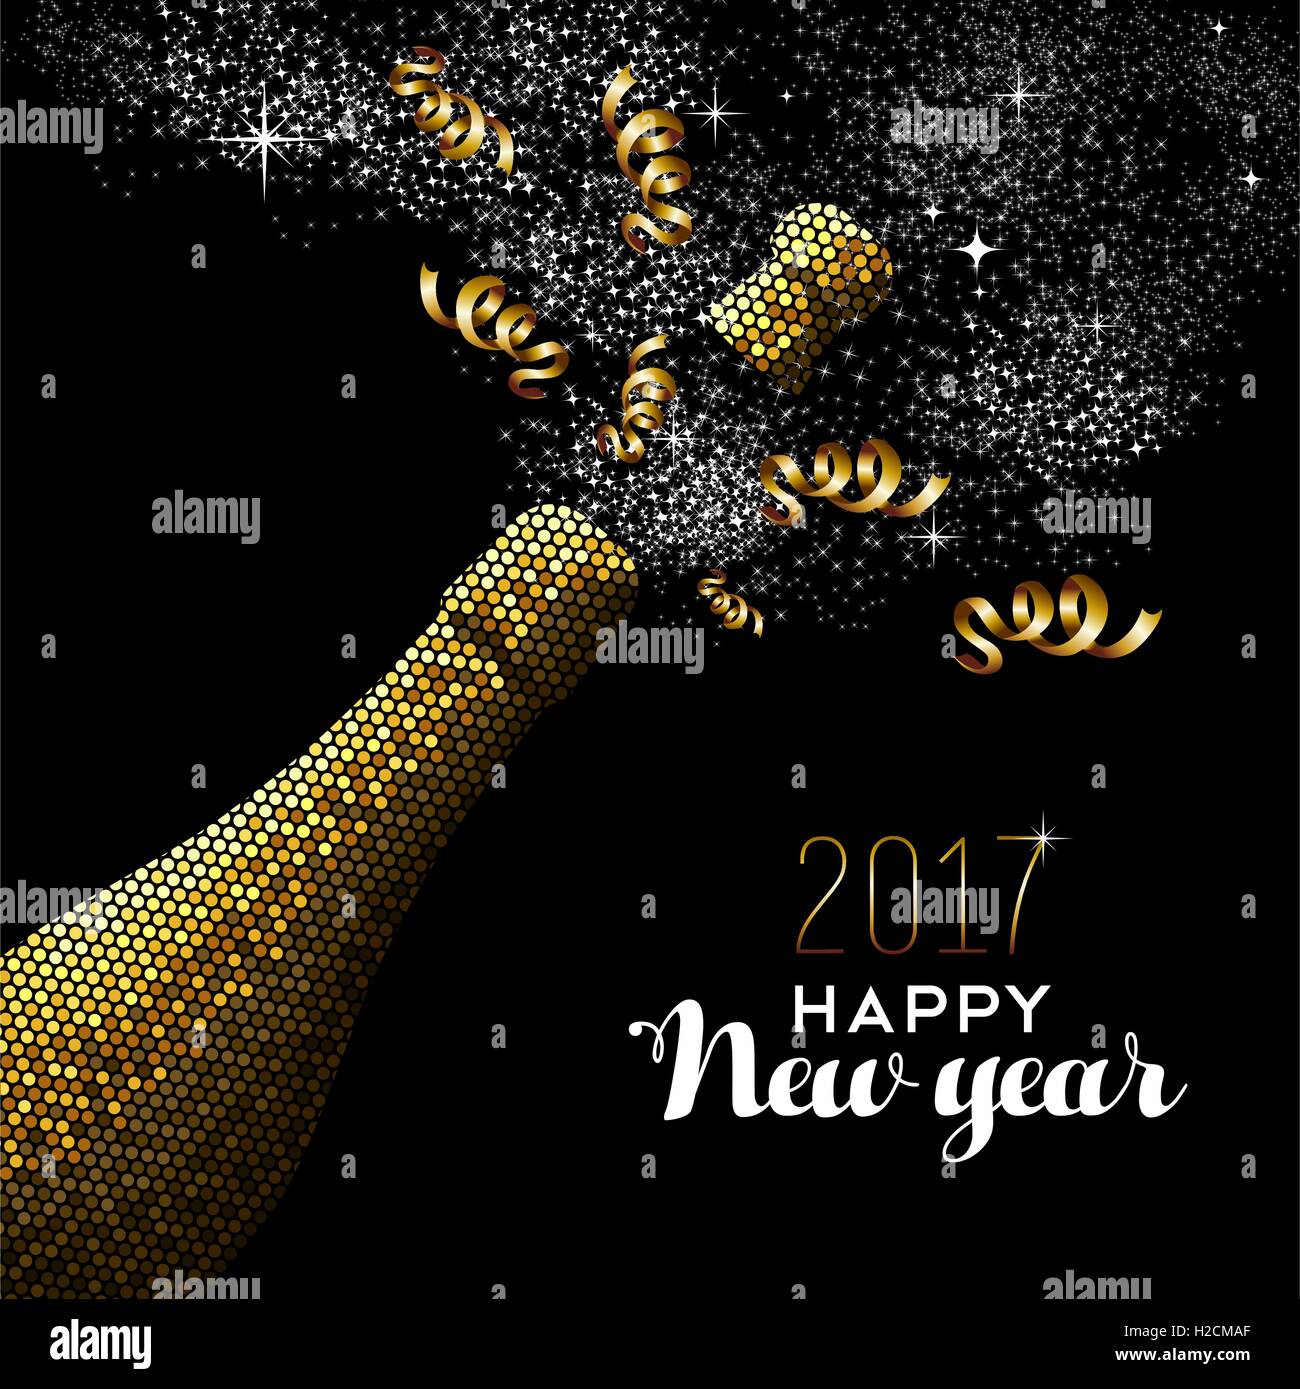 Happy new year 2017 gold champagne bottle celebration in mosaic style. Ideal for holiday card or elegant party invitation. EPS10 Stock Vector